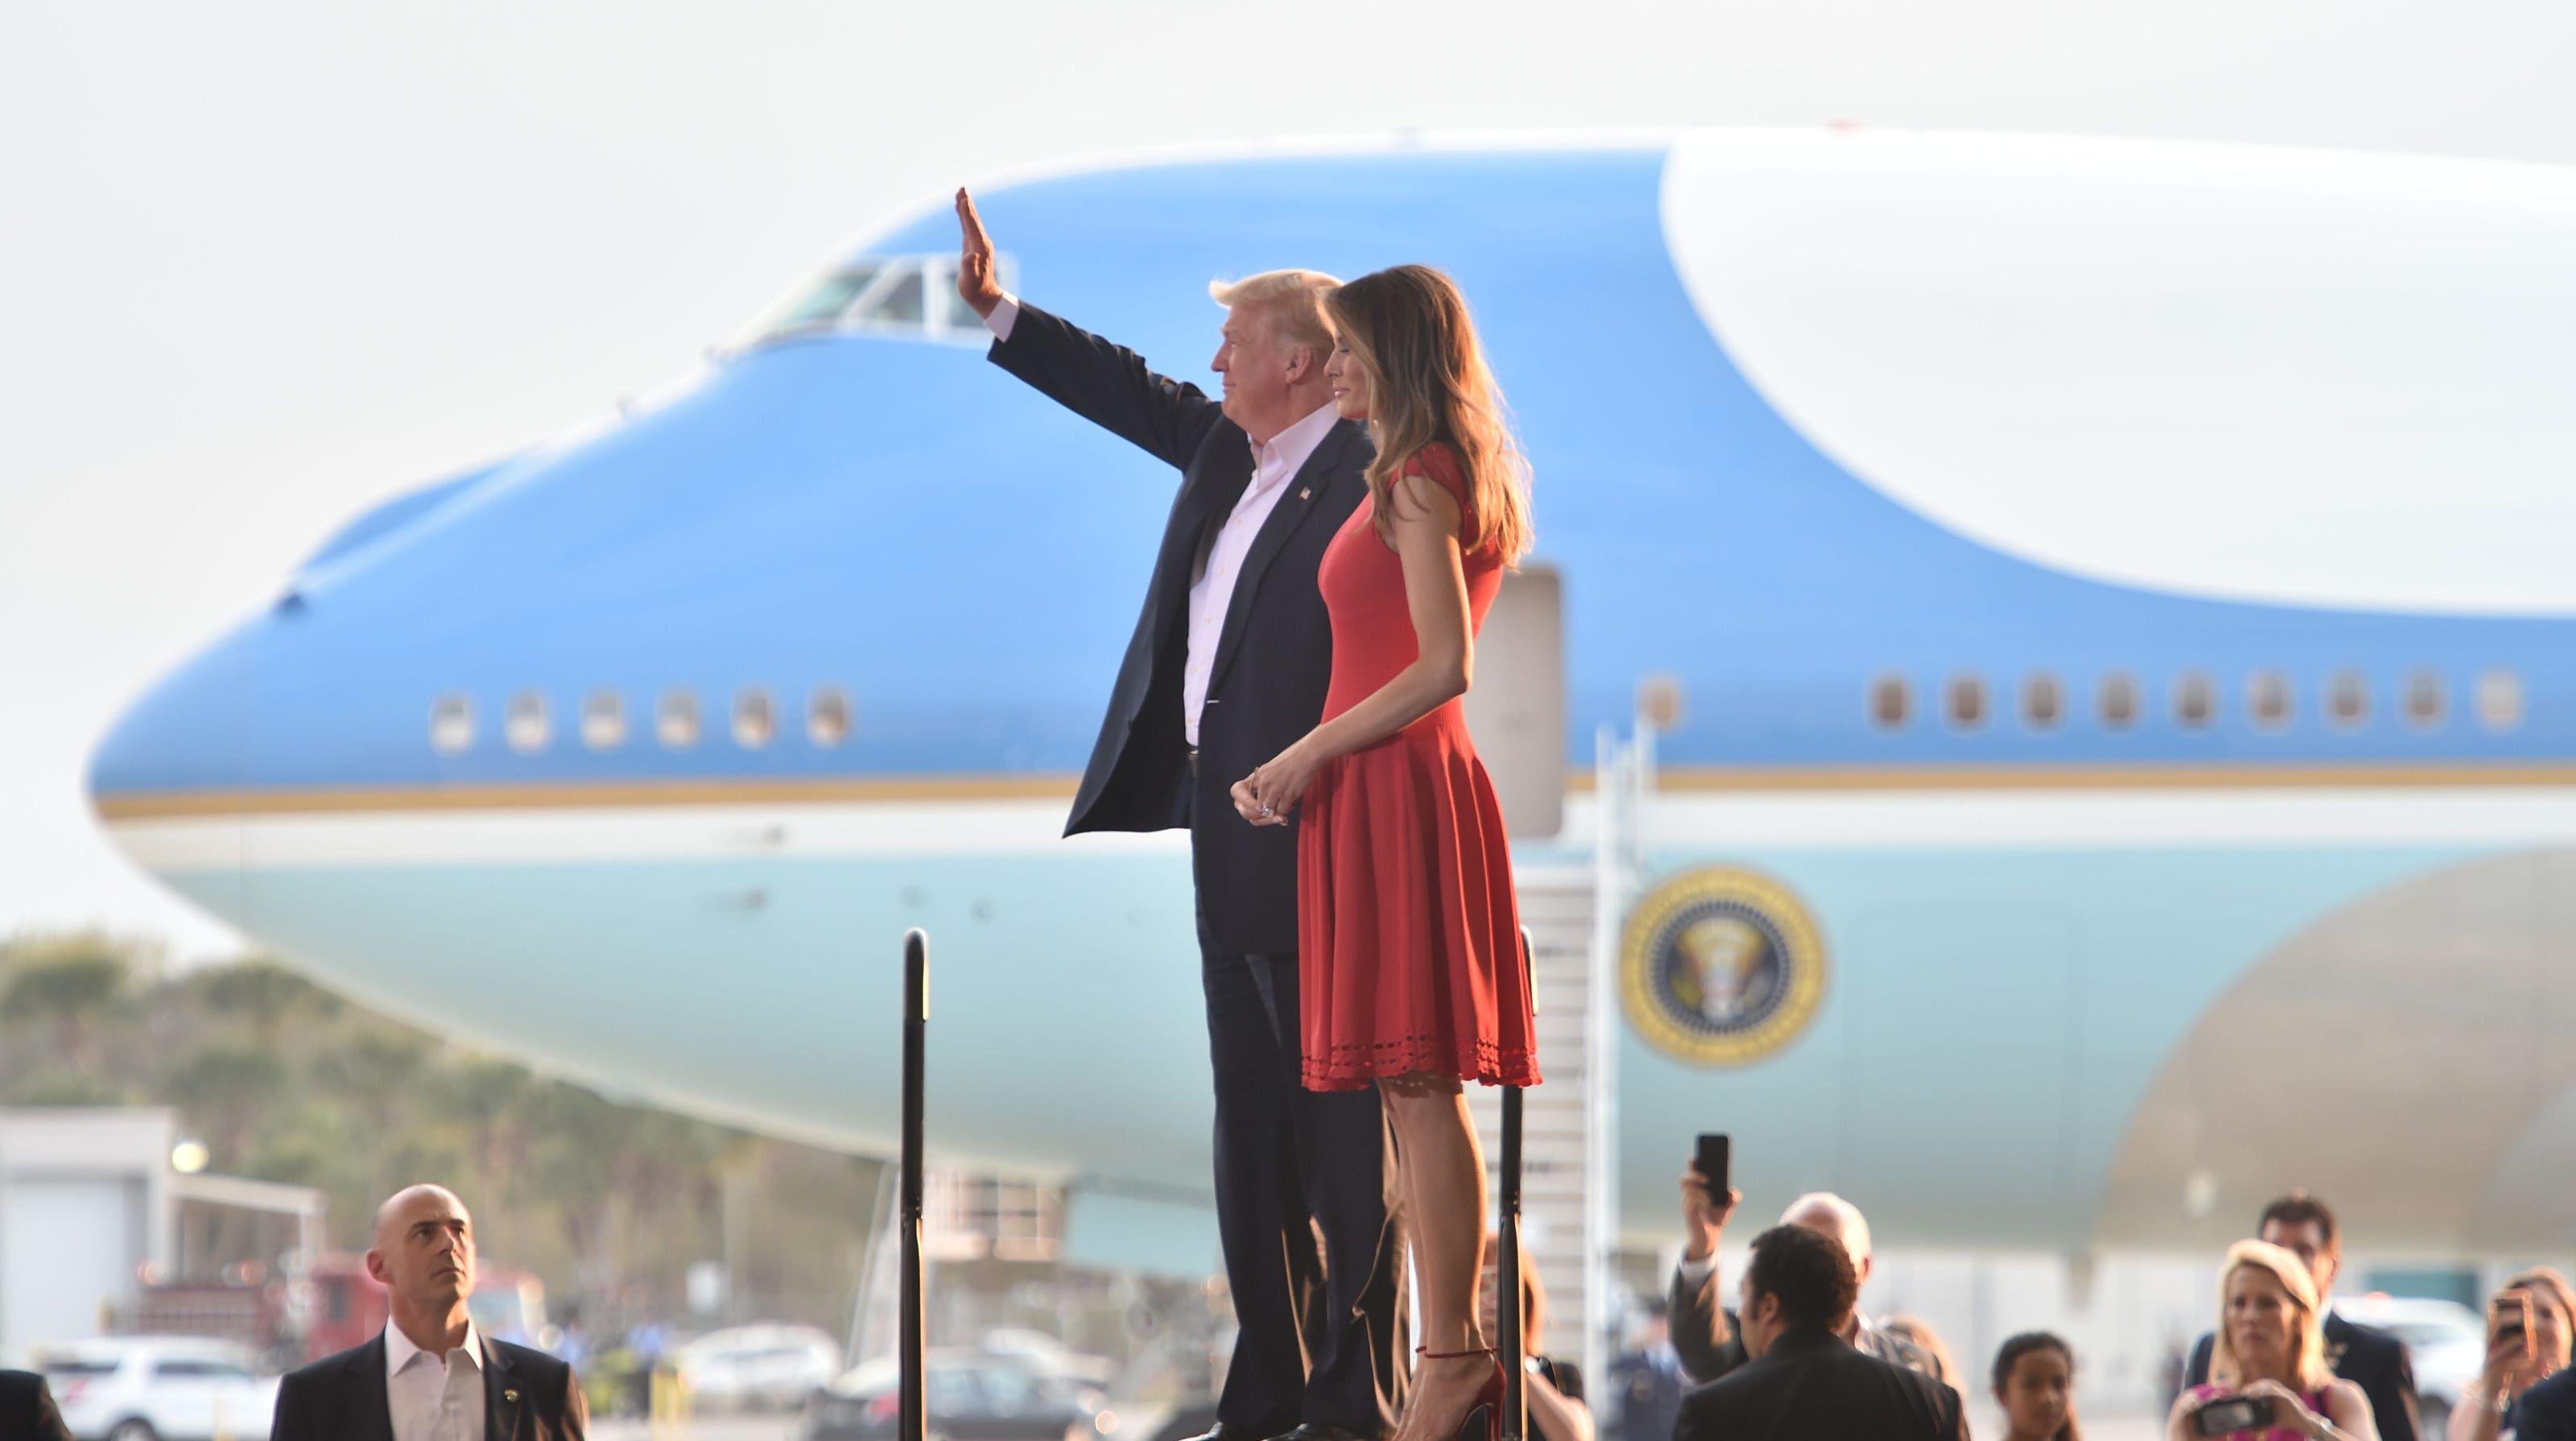 Trump and wife talking to people with plane in background